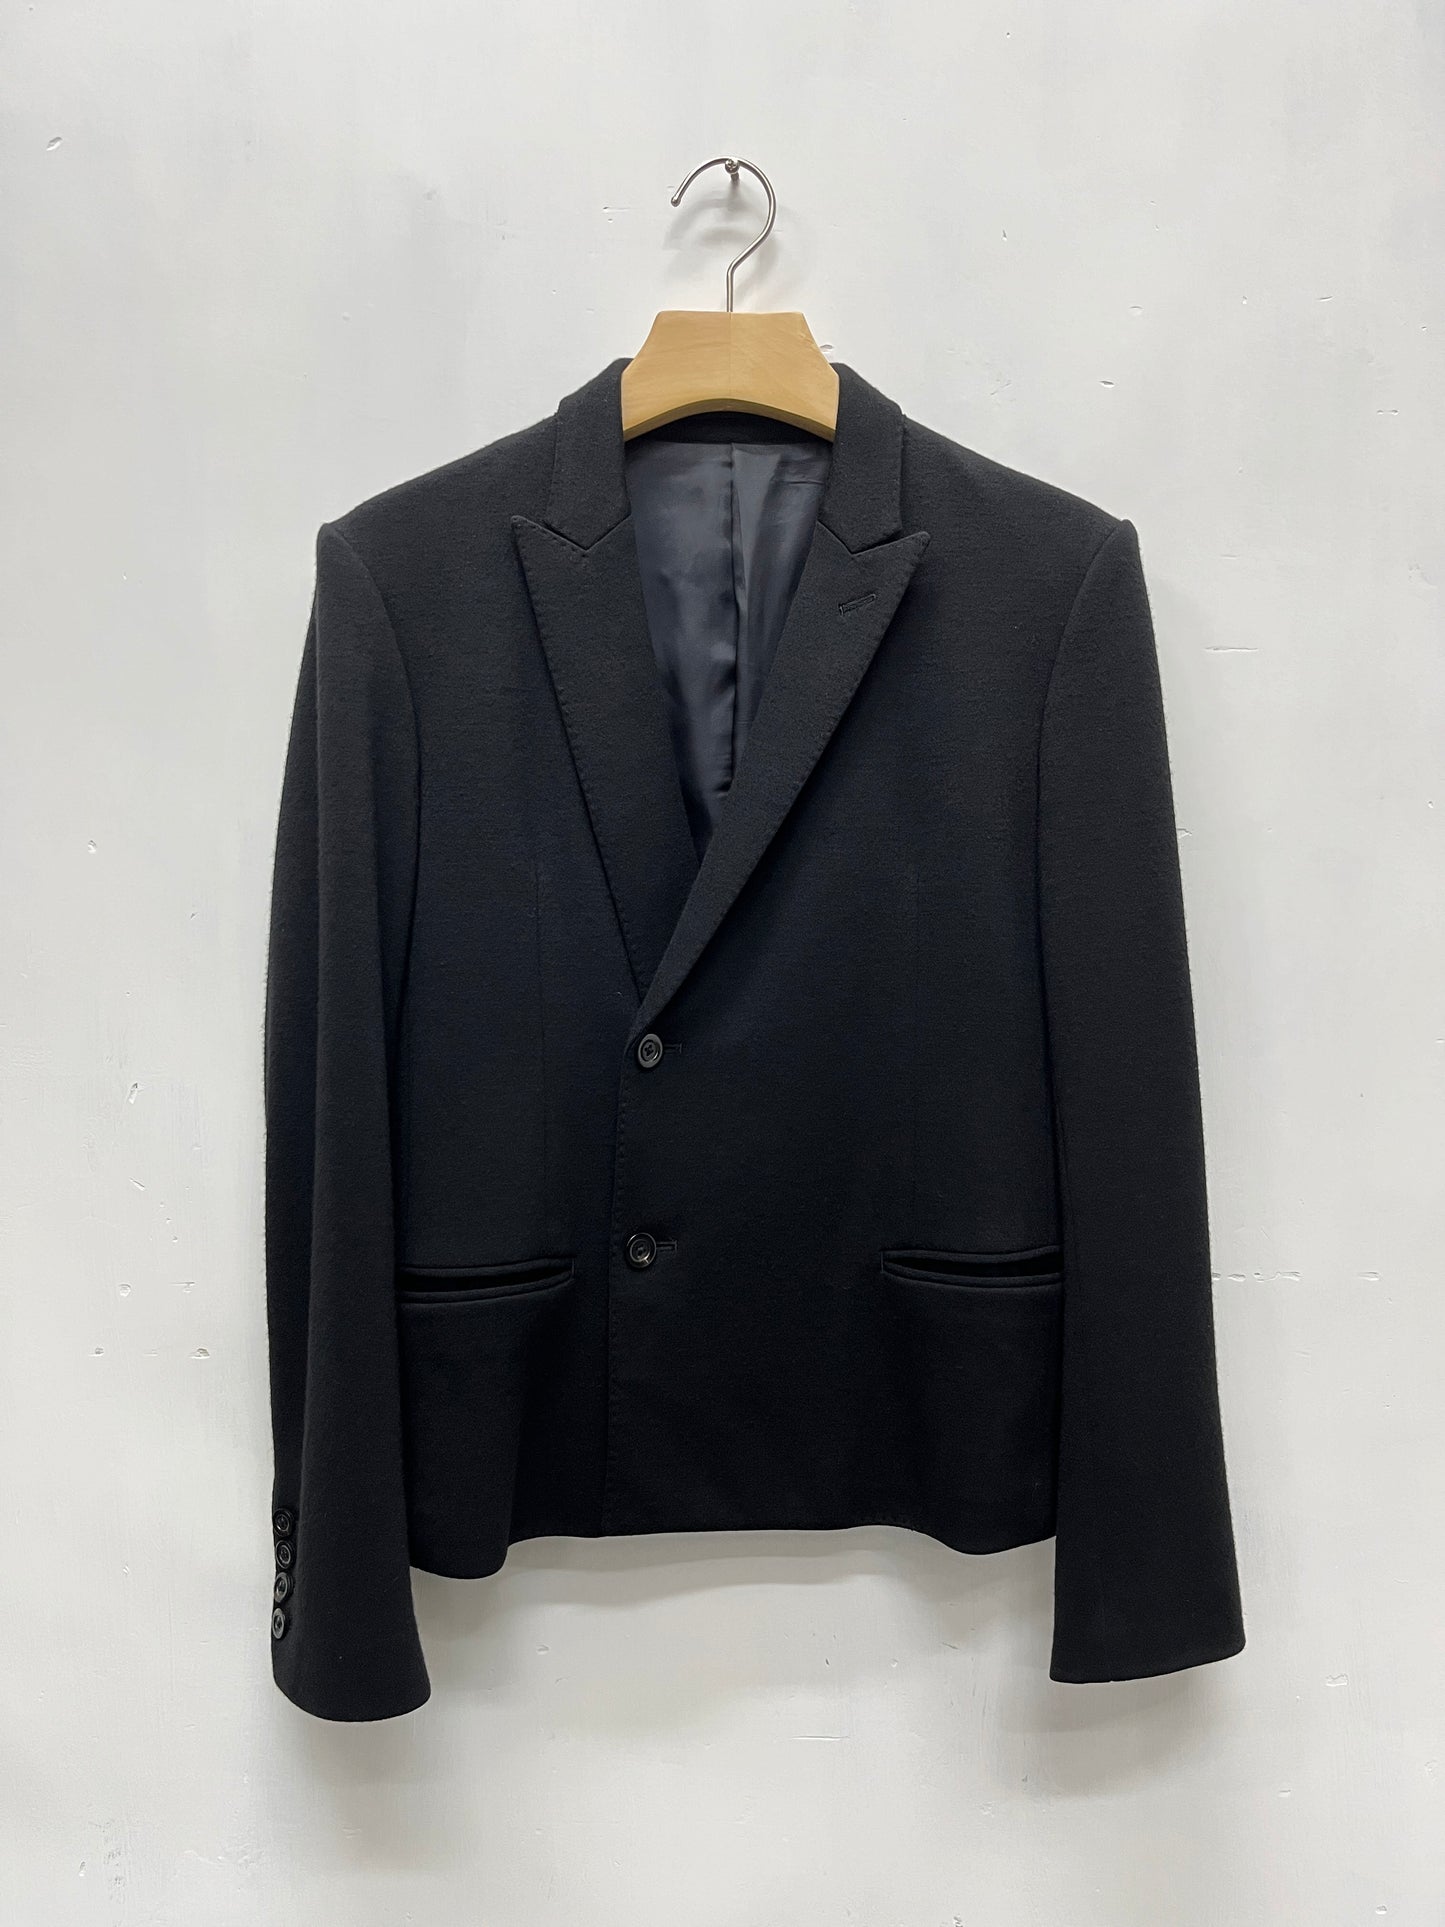 Lad Musician Double Breasted Jacket-Size 44